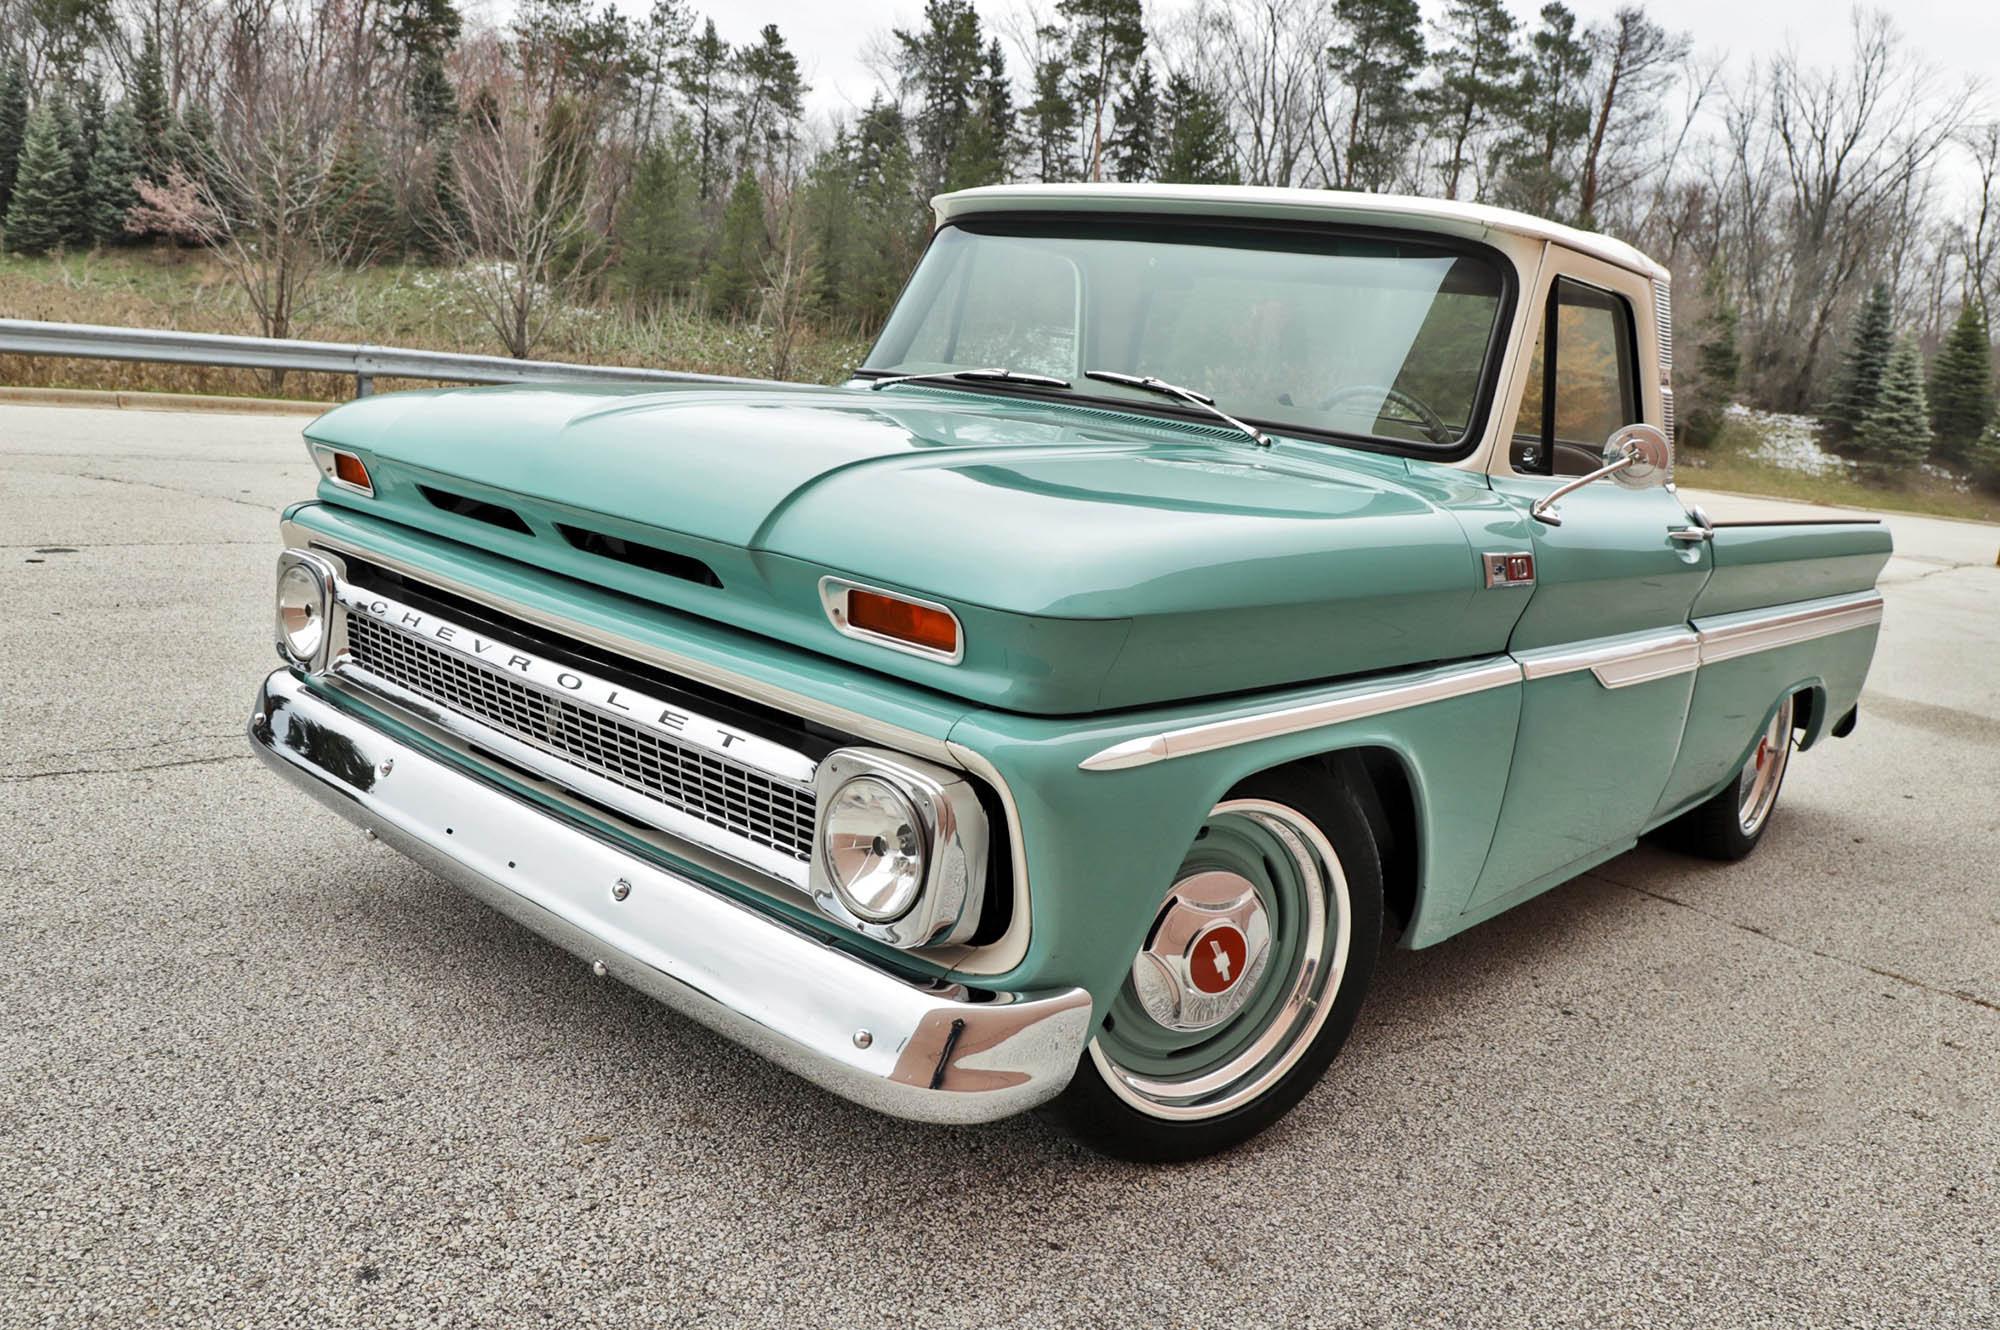 1965 Chevy C10 With A Ls3 V8 Engine Swap Depot